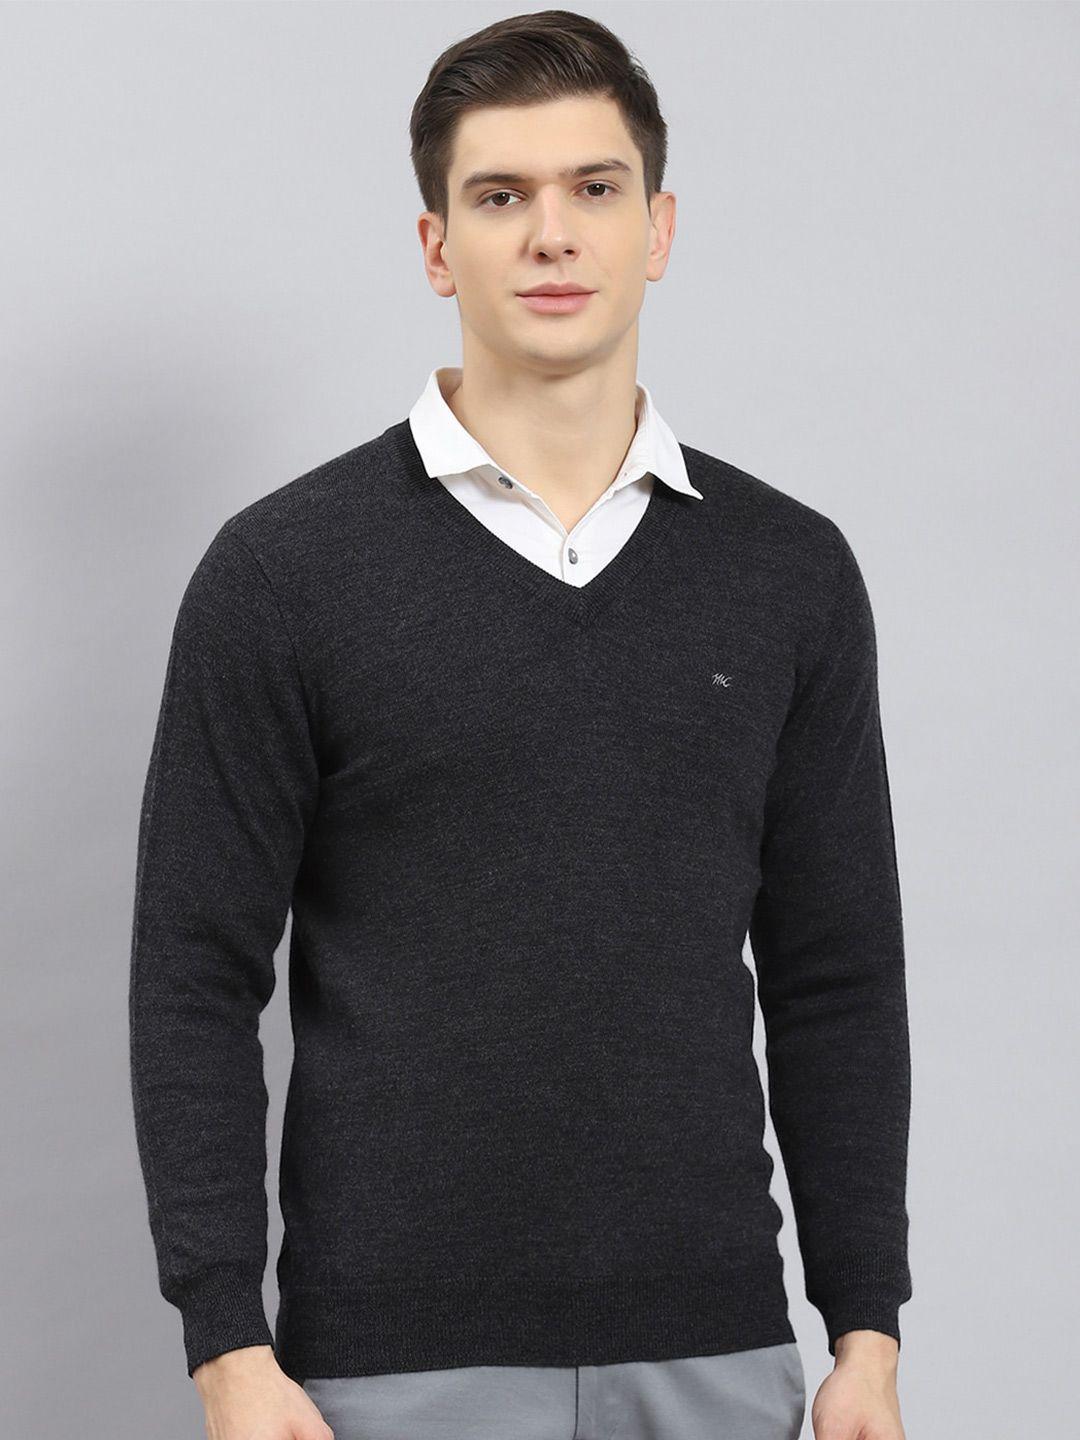 monte carlo v-neck woollen pullover ribbed sweaters